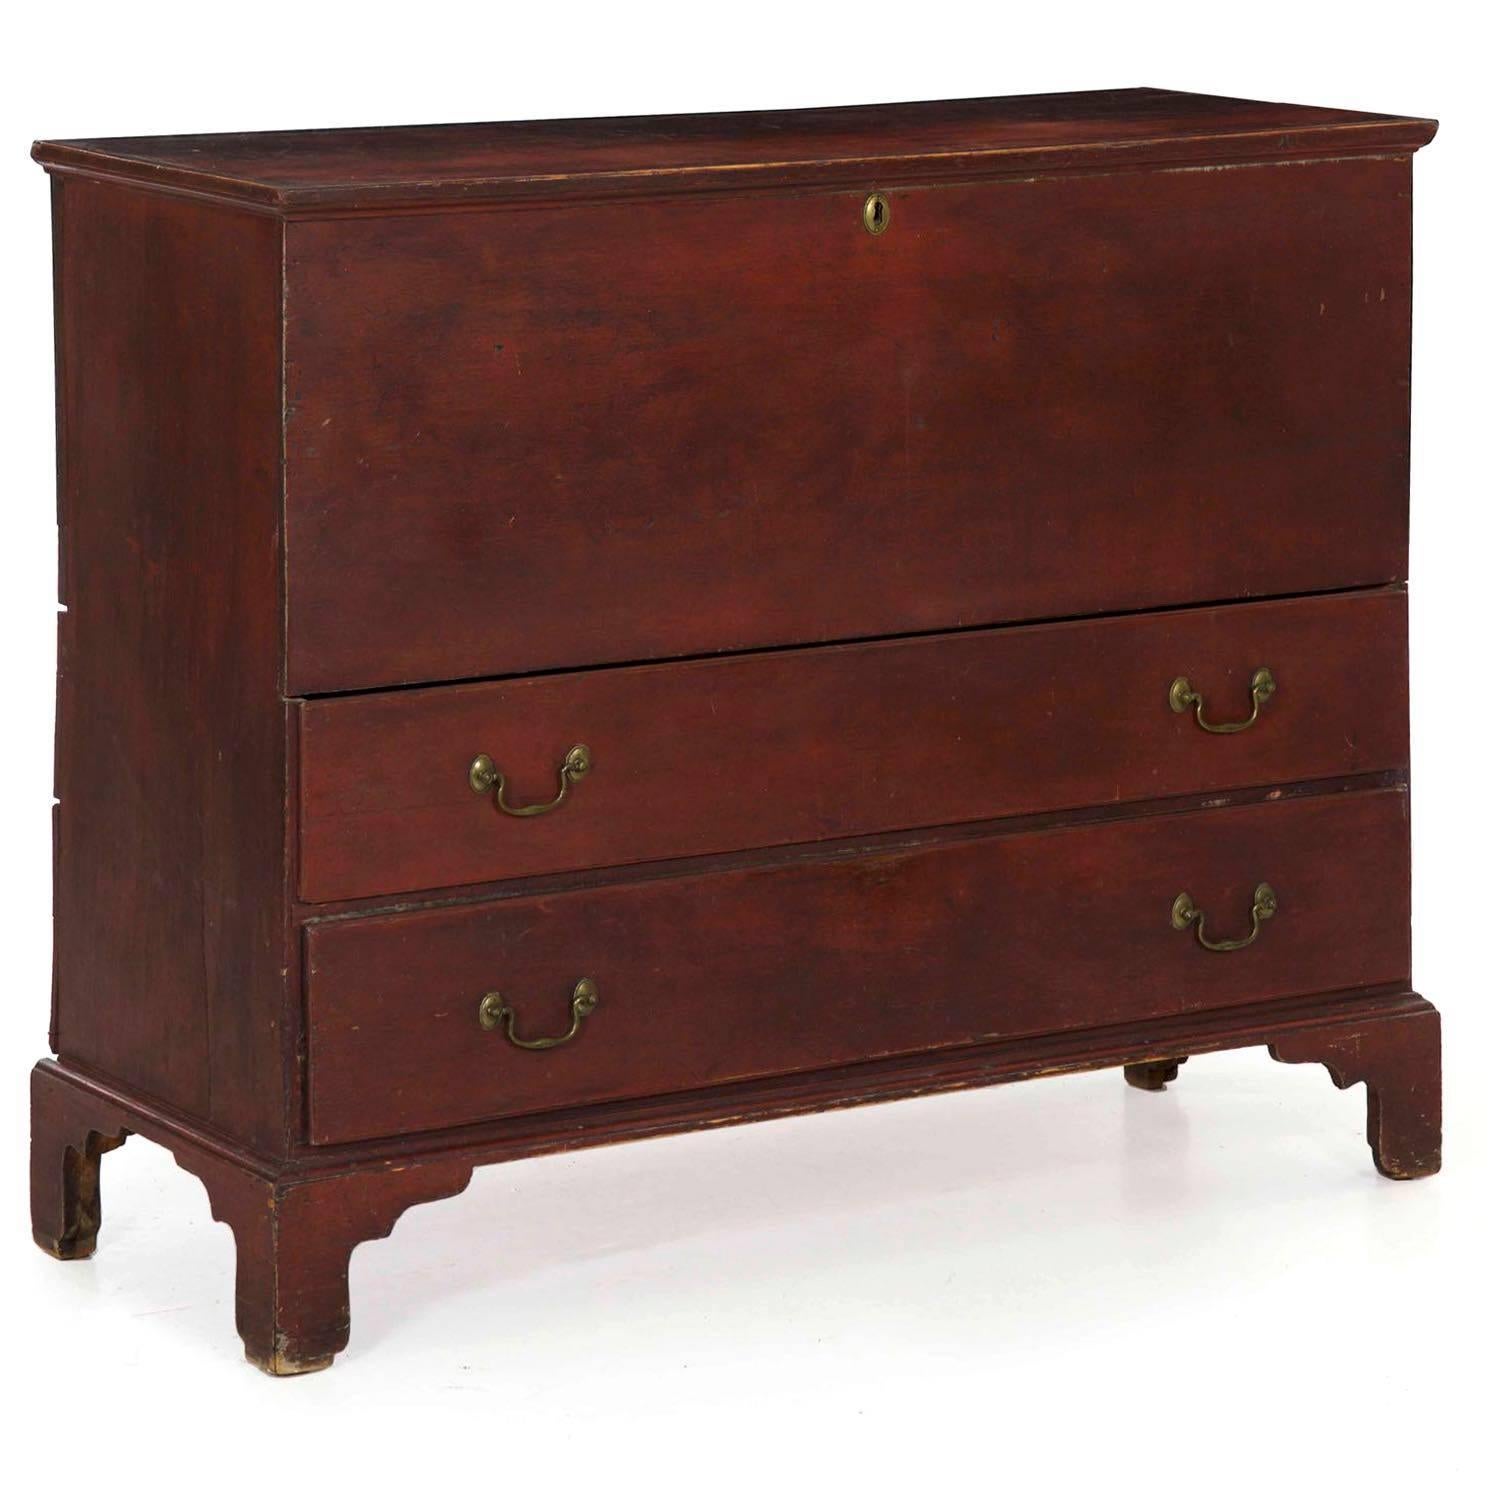 Hand-Painted 19th Century American Red Painted Mule Blanket Chest of Drawers